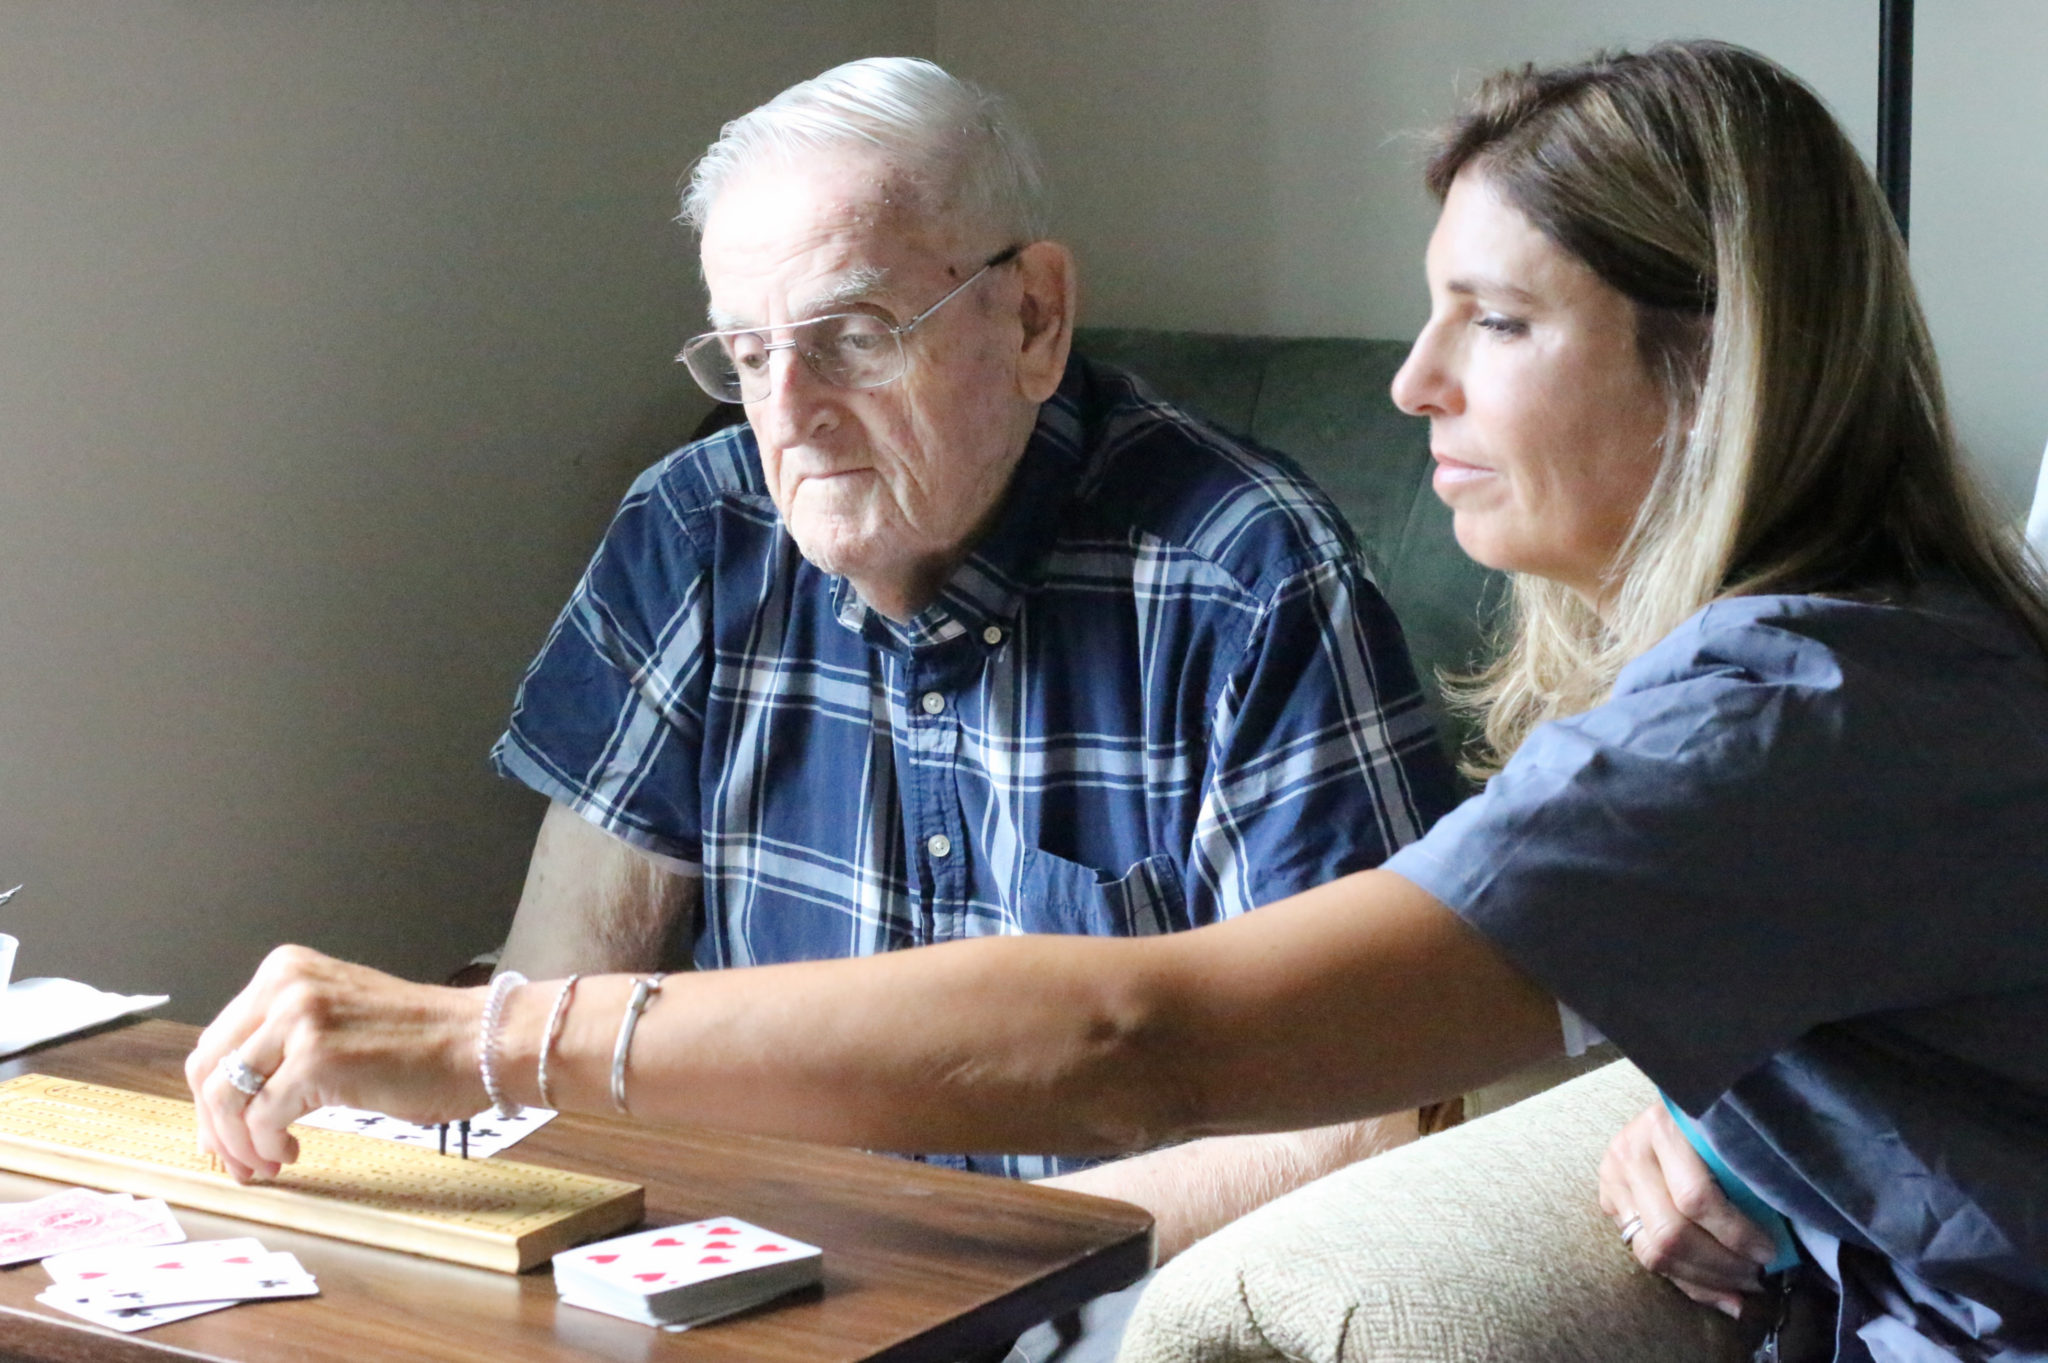 hospice volunteer plays cribbage with patient in Massachusetts